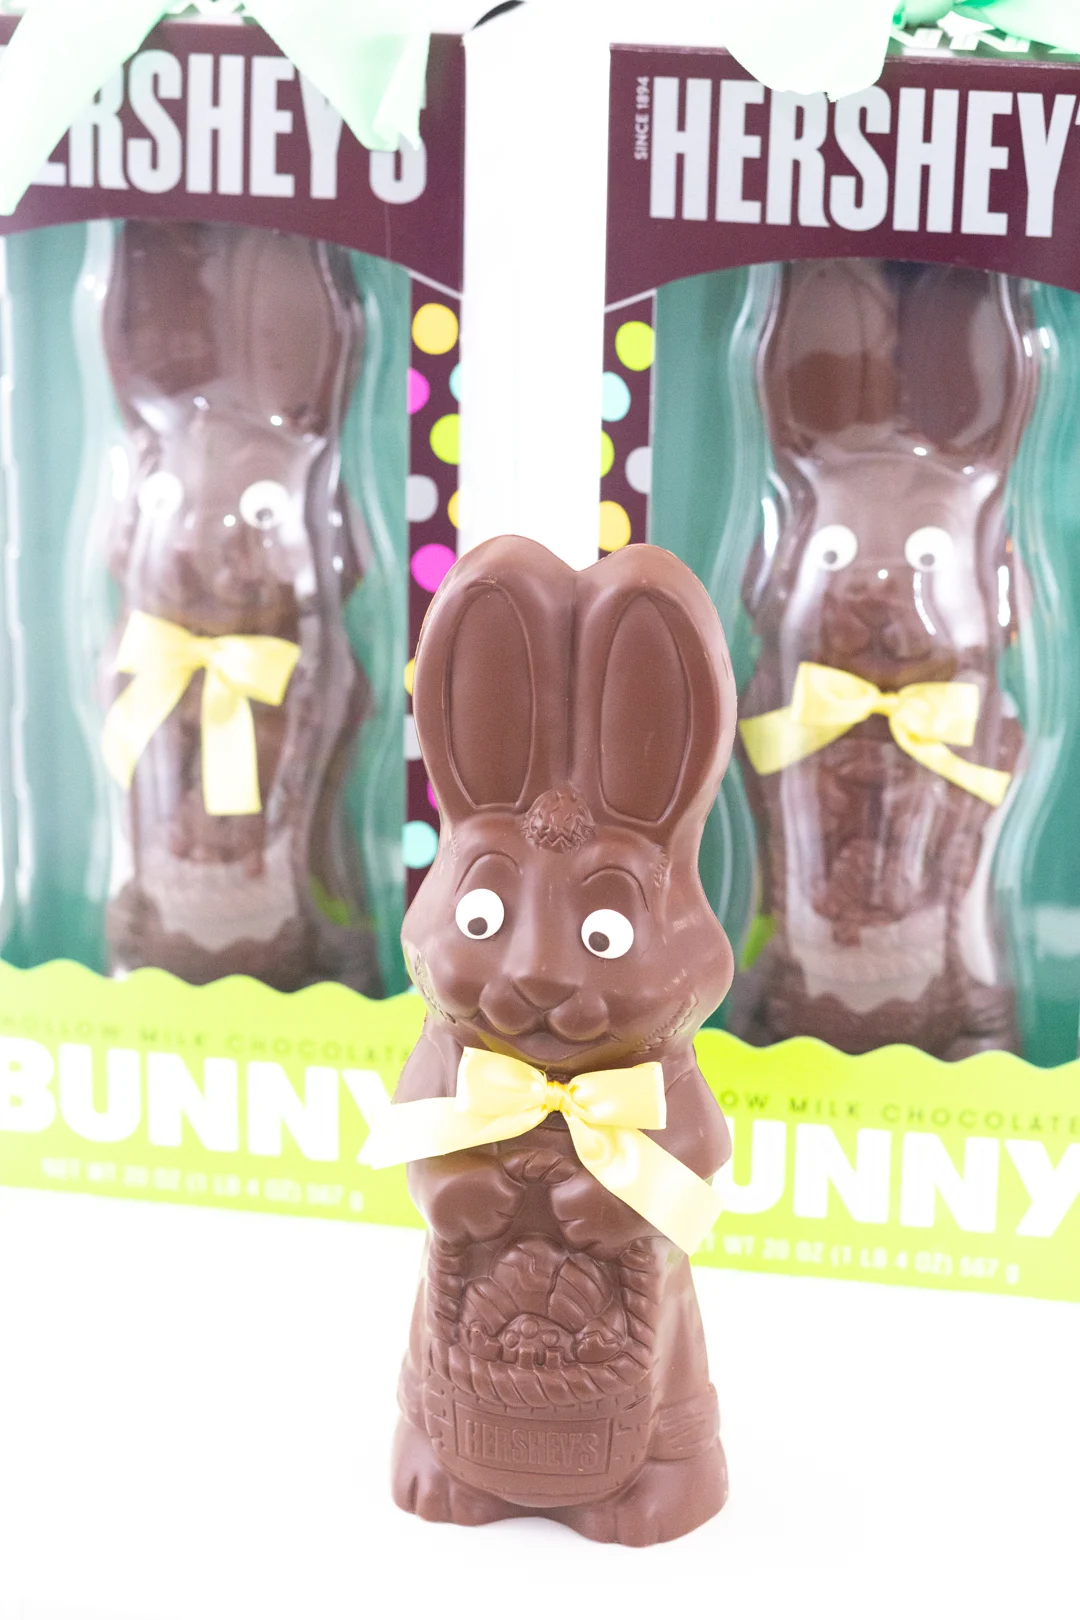 extra large chocolate easter bunny in front of the hersheys package